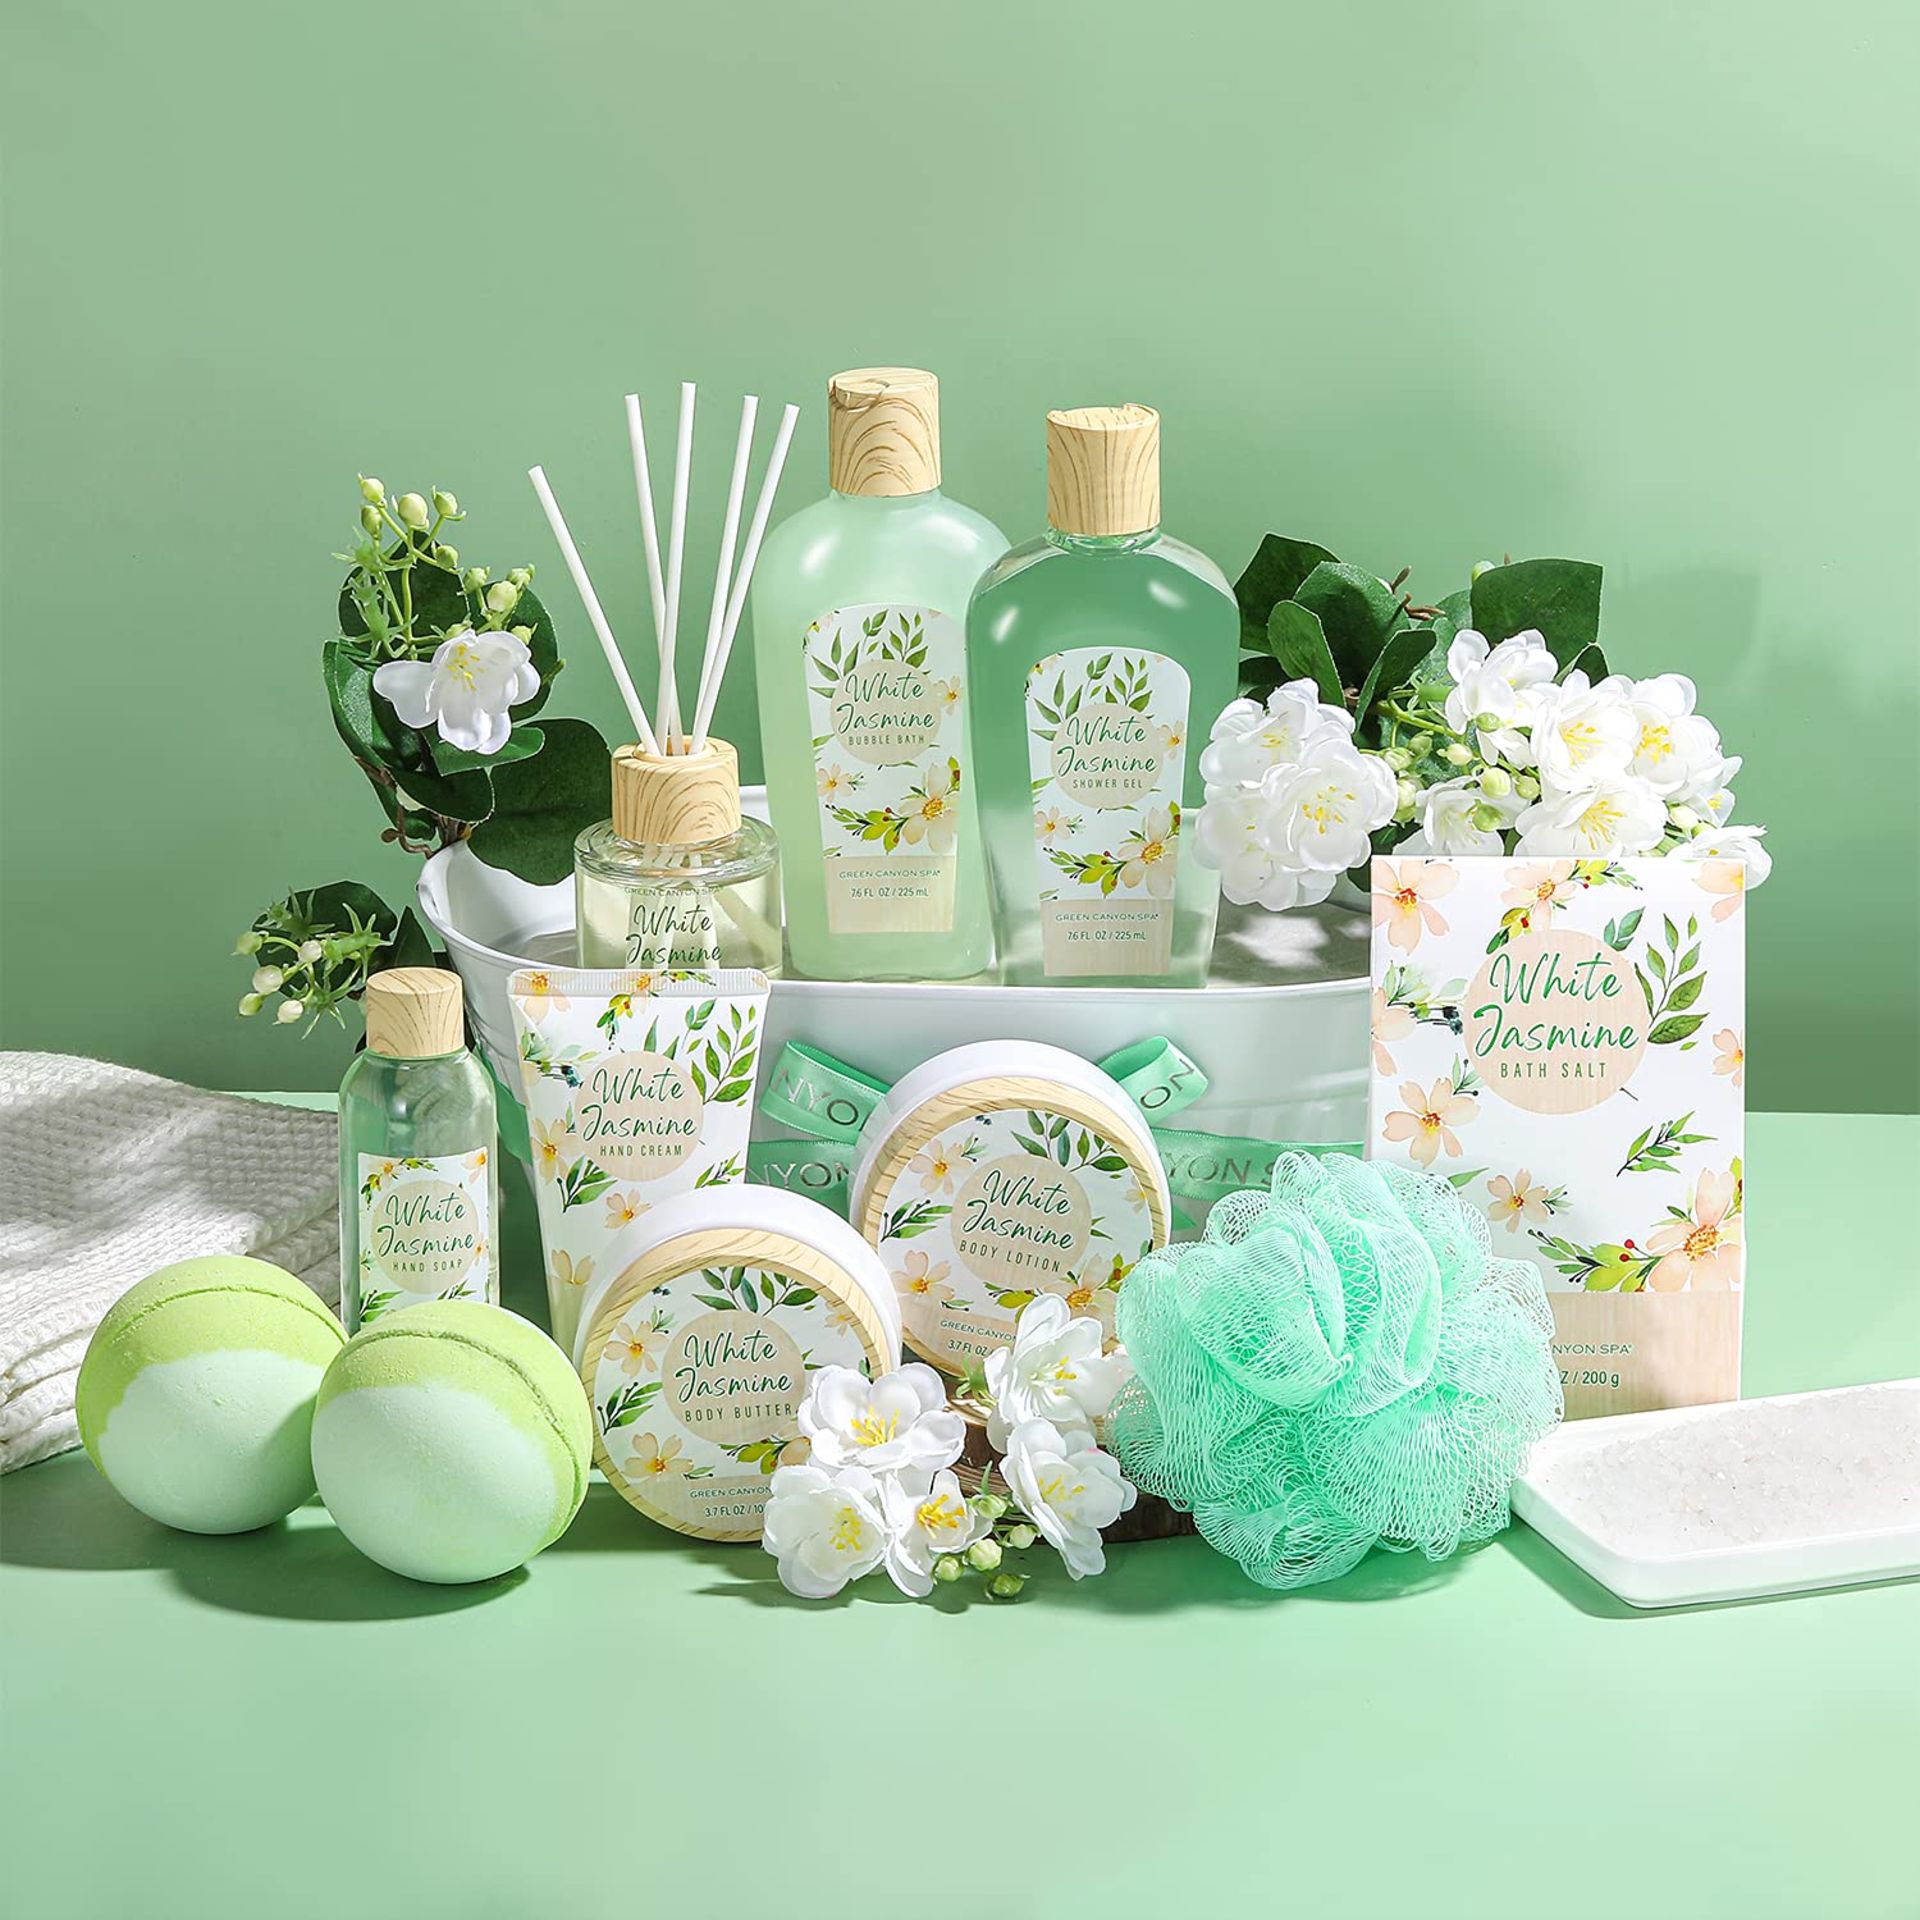 4 X NEW PACKAGED - Green Canyon 12 Pcs White Jasmine Bath Gift Sets Home Spa Gift Baskets Green - Image 2 of 3